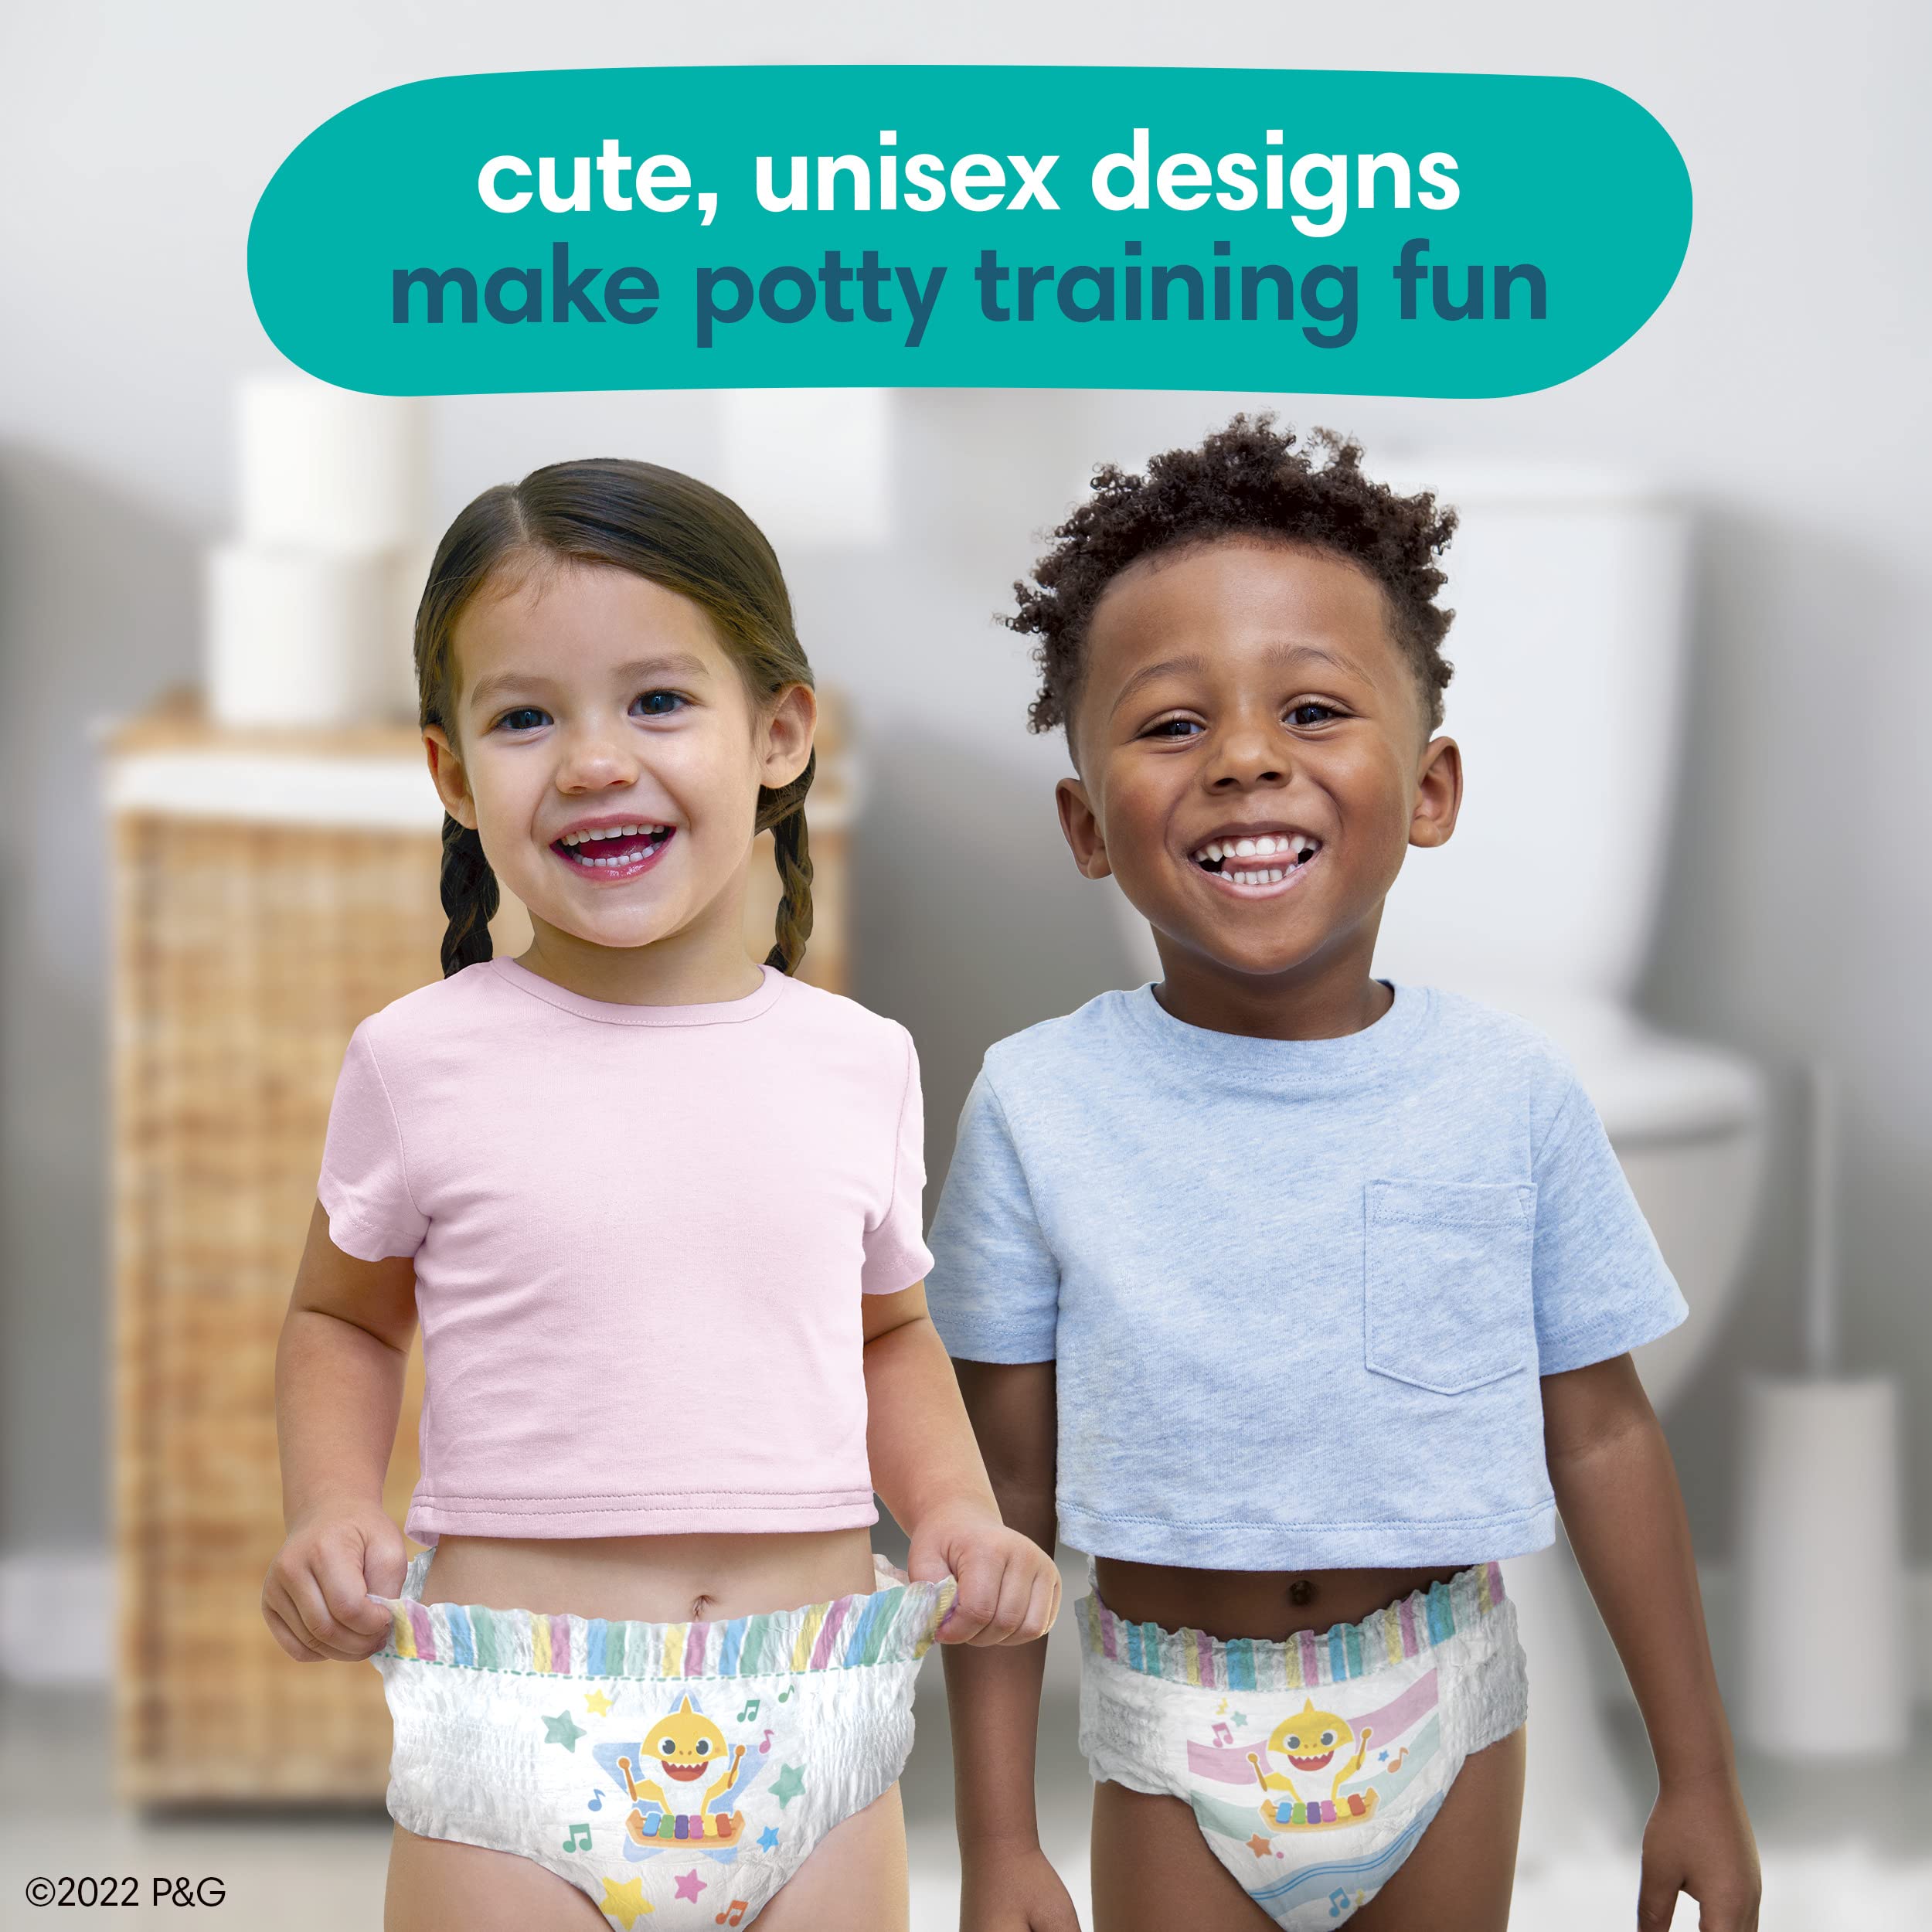 pampers pure protection pants